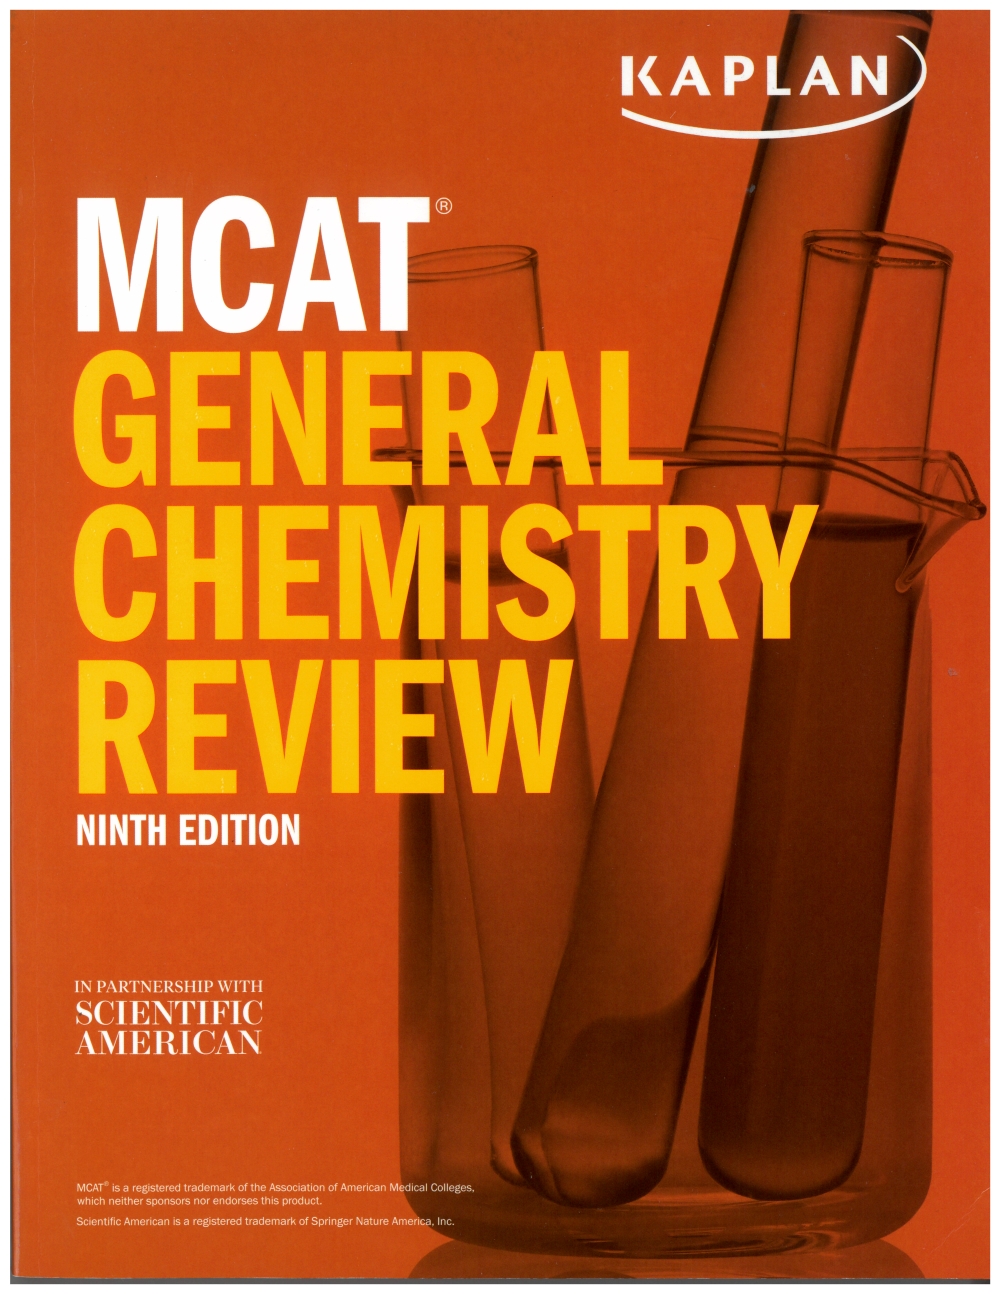 MCAT General Chemistry Review 9th Edition